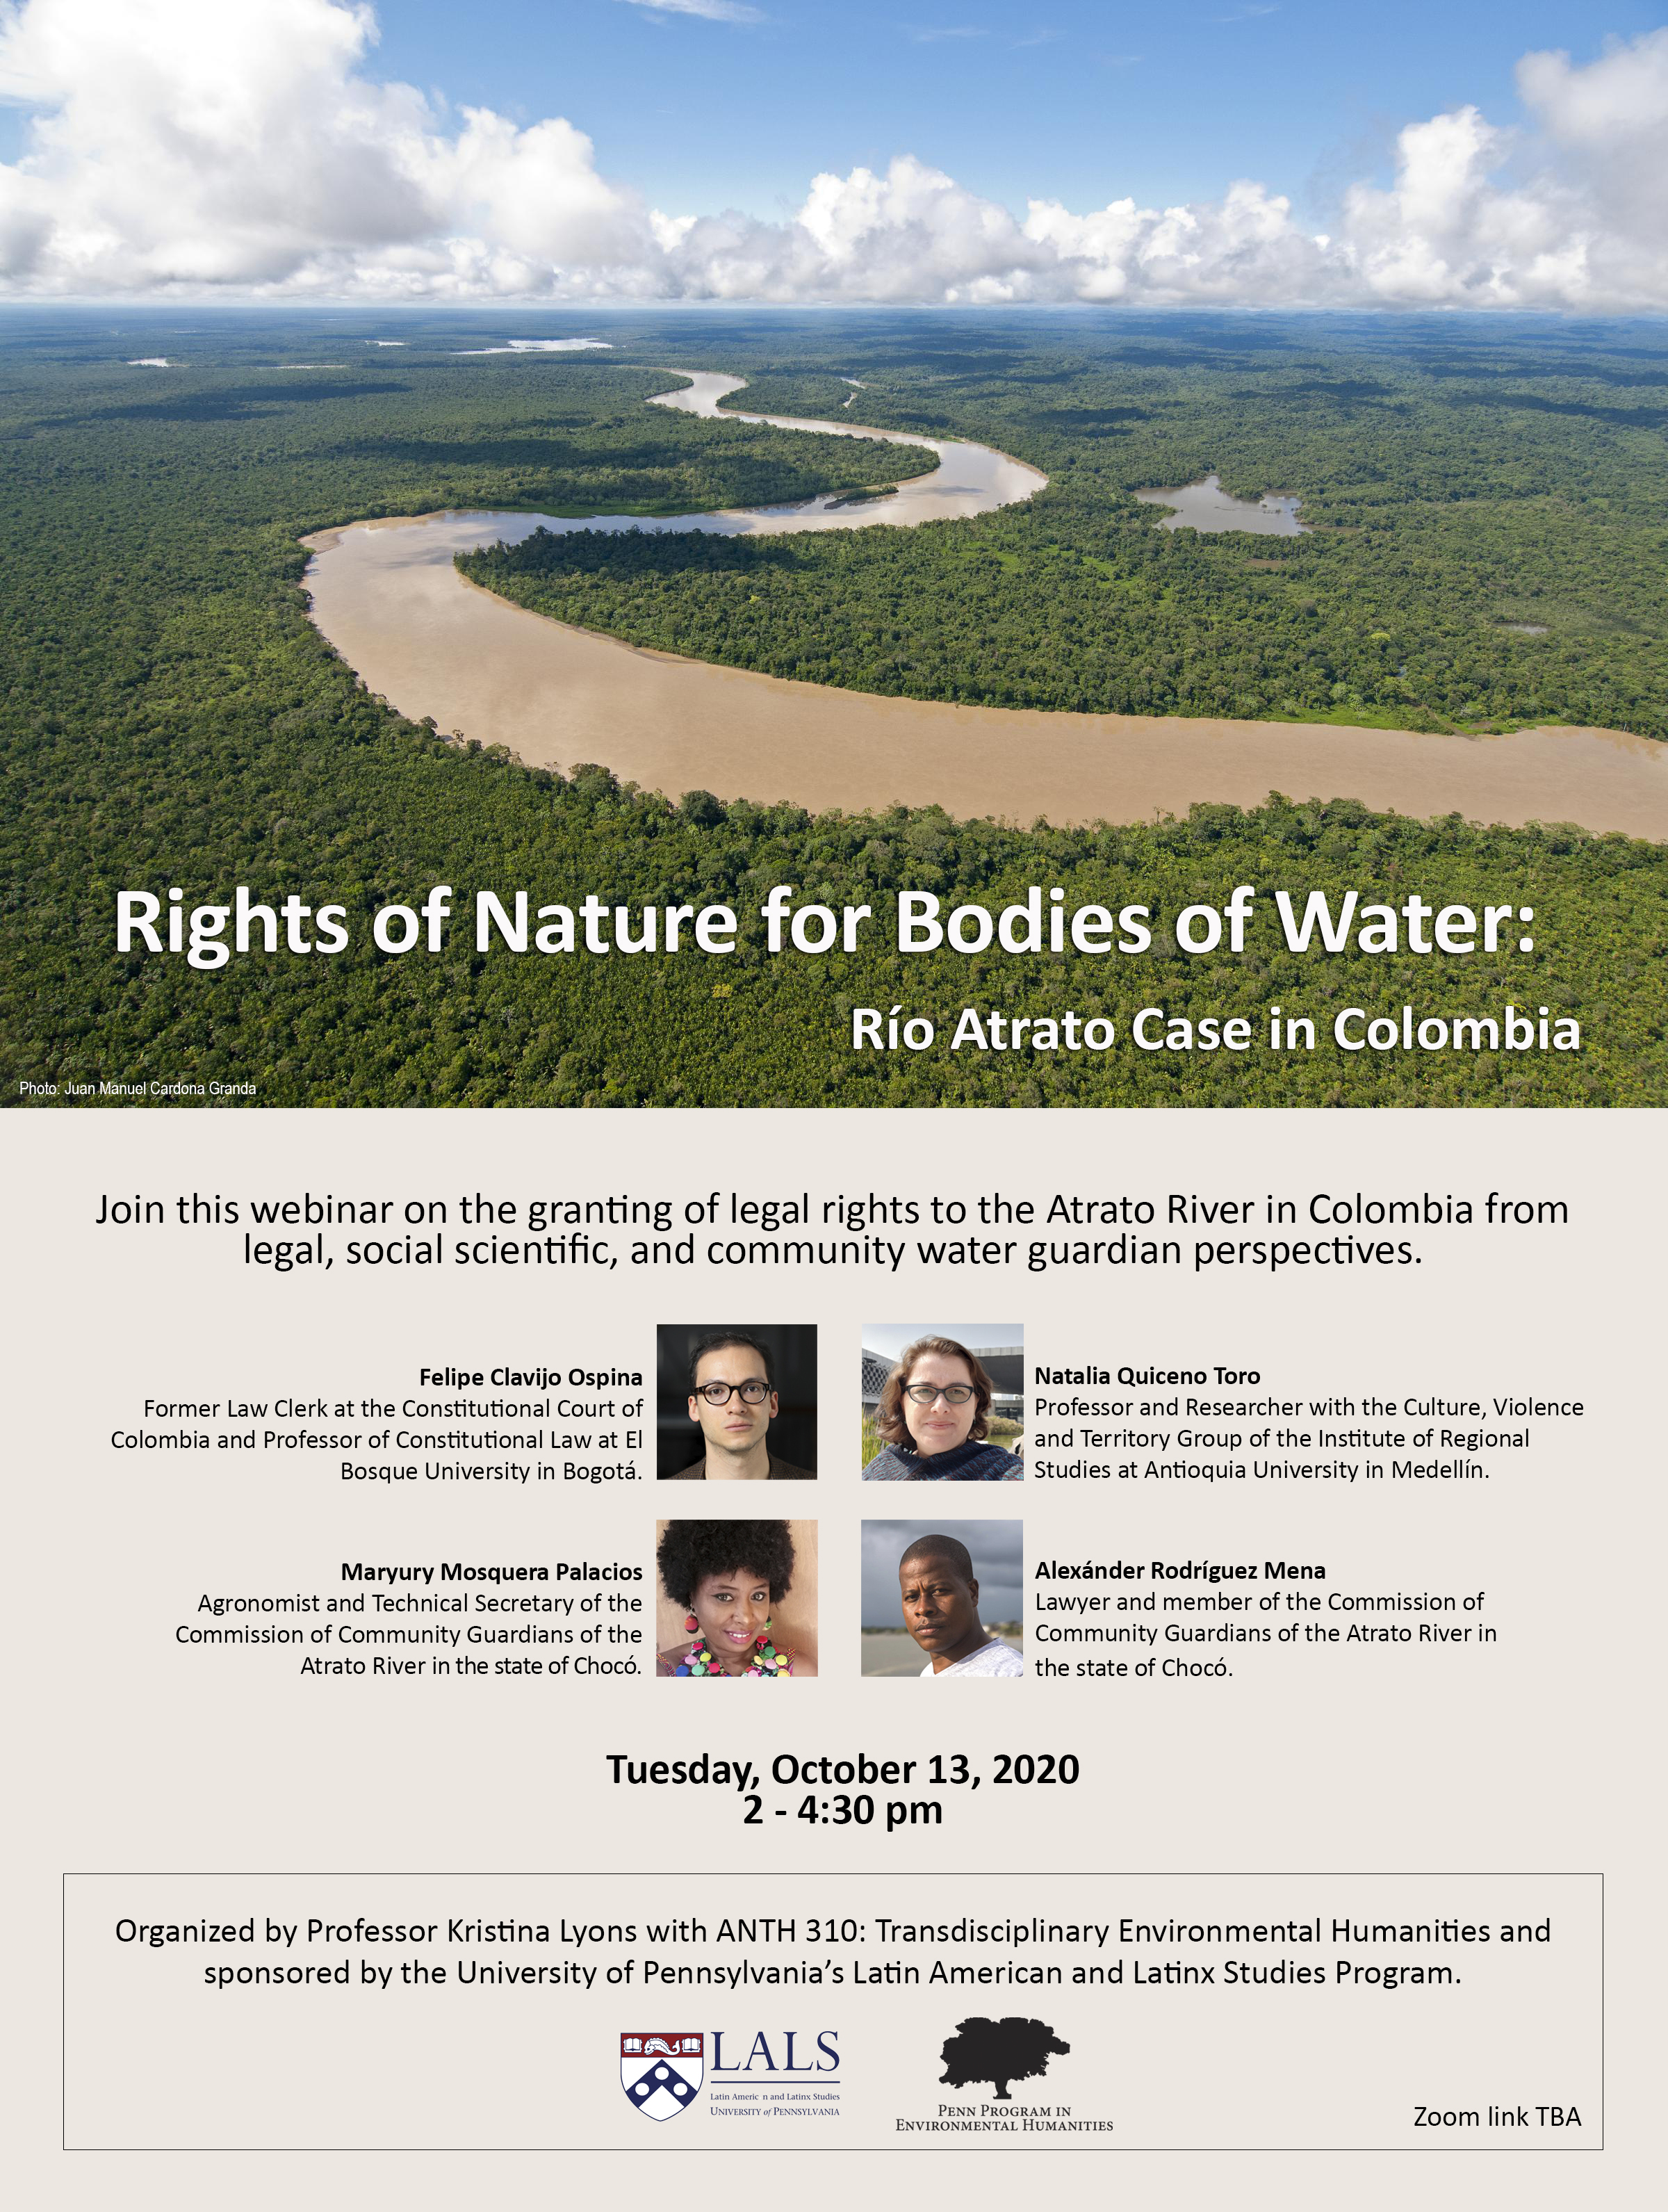 This is an event flyer for Rights of Nature for Bodies of Water displaying a photo of the Río Atrato